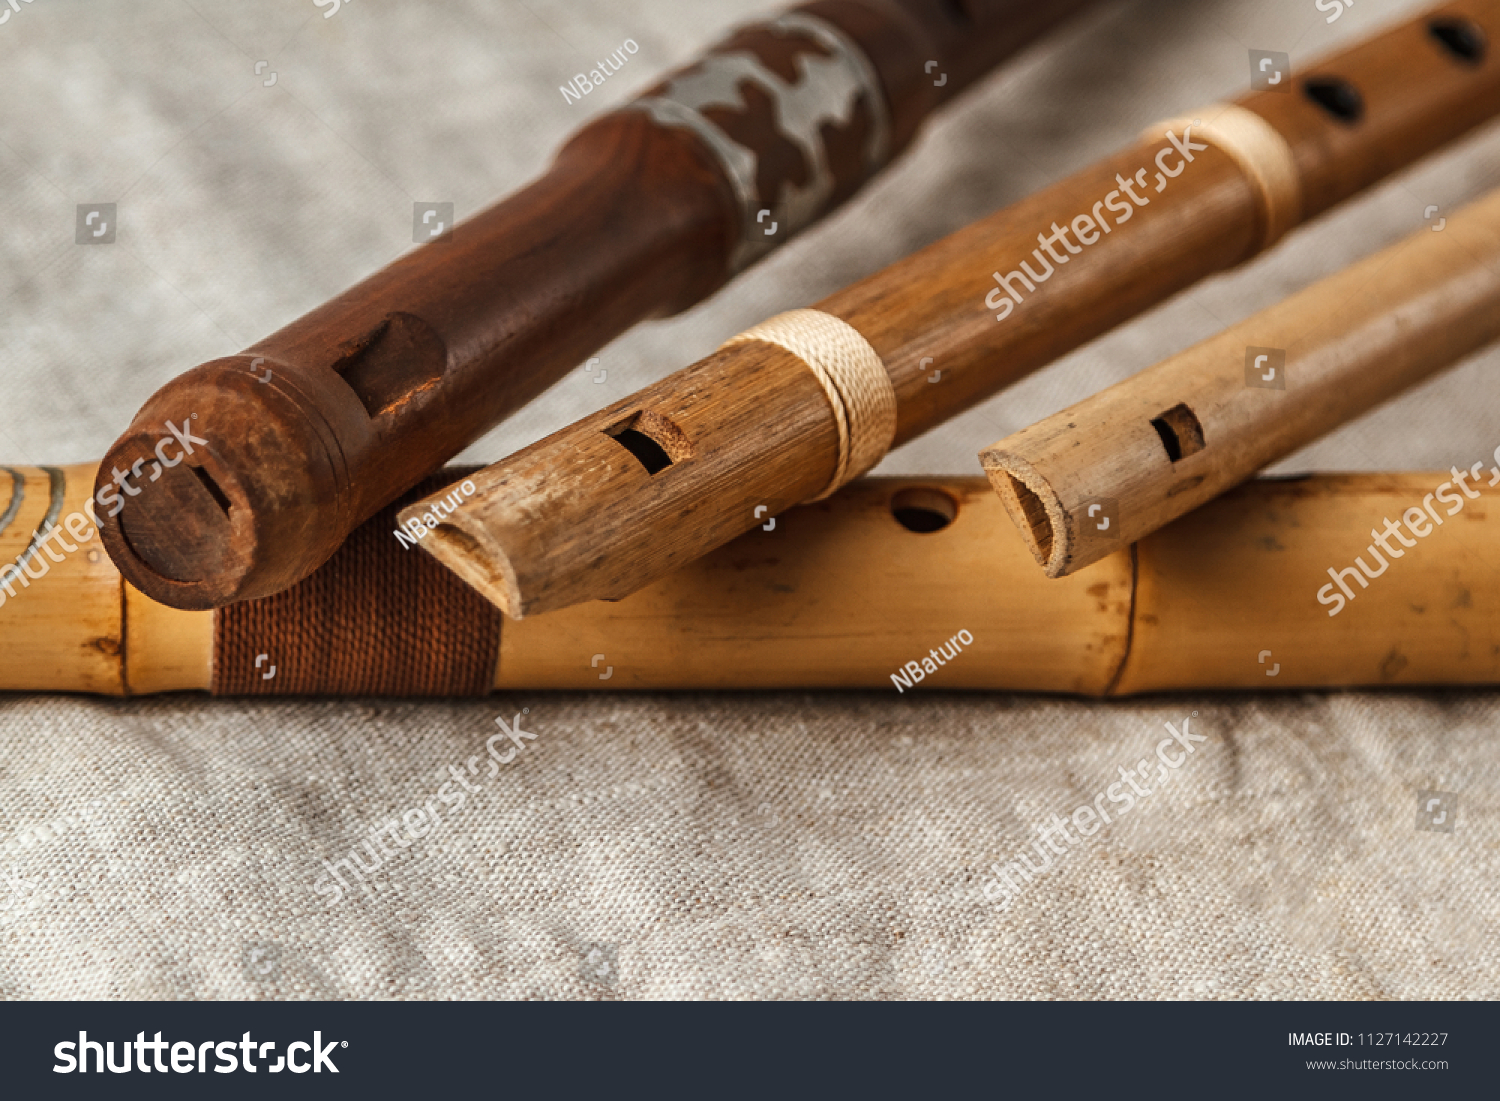 Wooden flute on grey linen tablecloth #1127142227